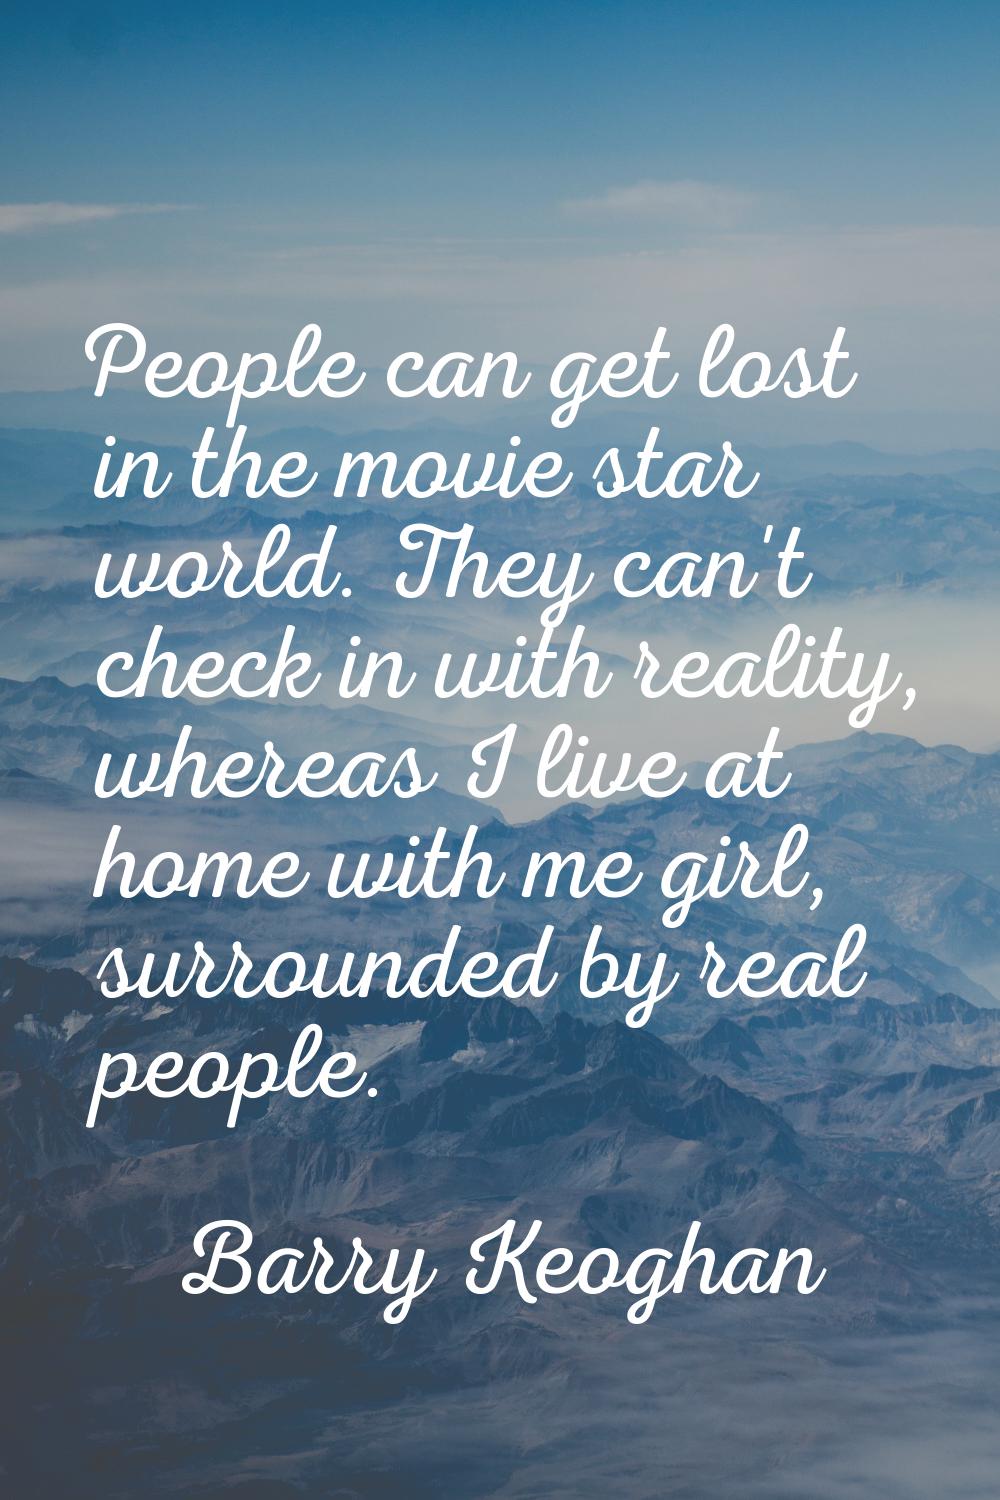 People can get lost in the movie star world. They can't check in with reality, whereas I live at ho